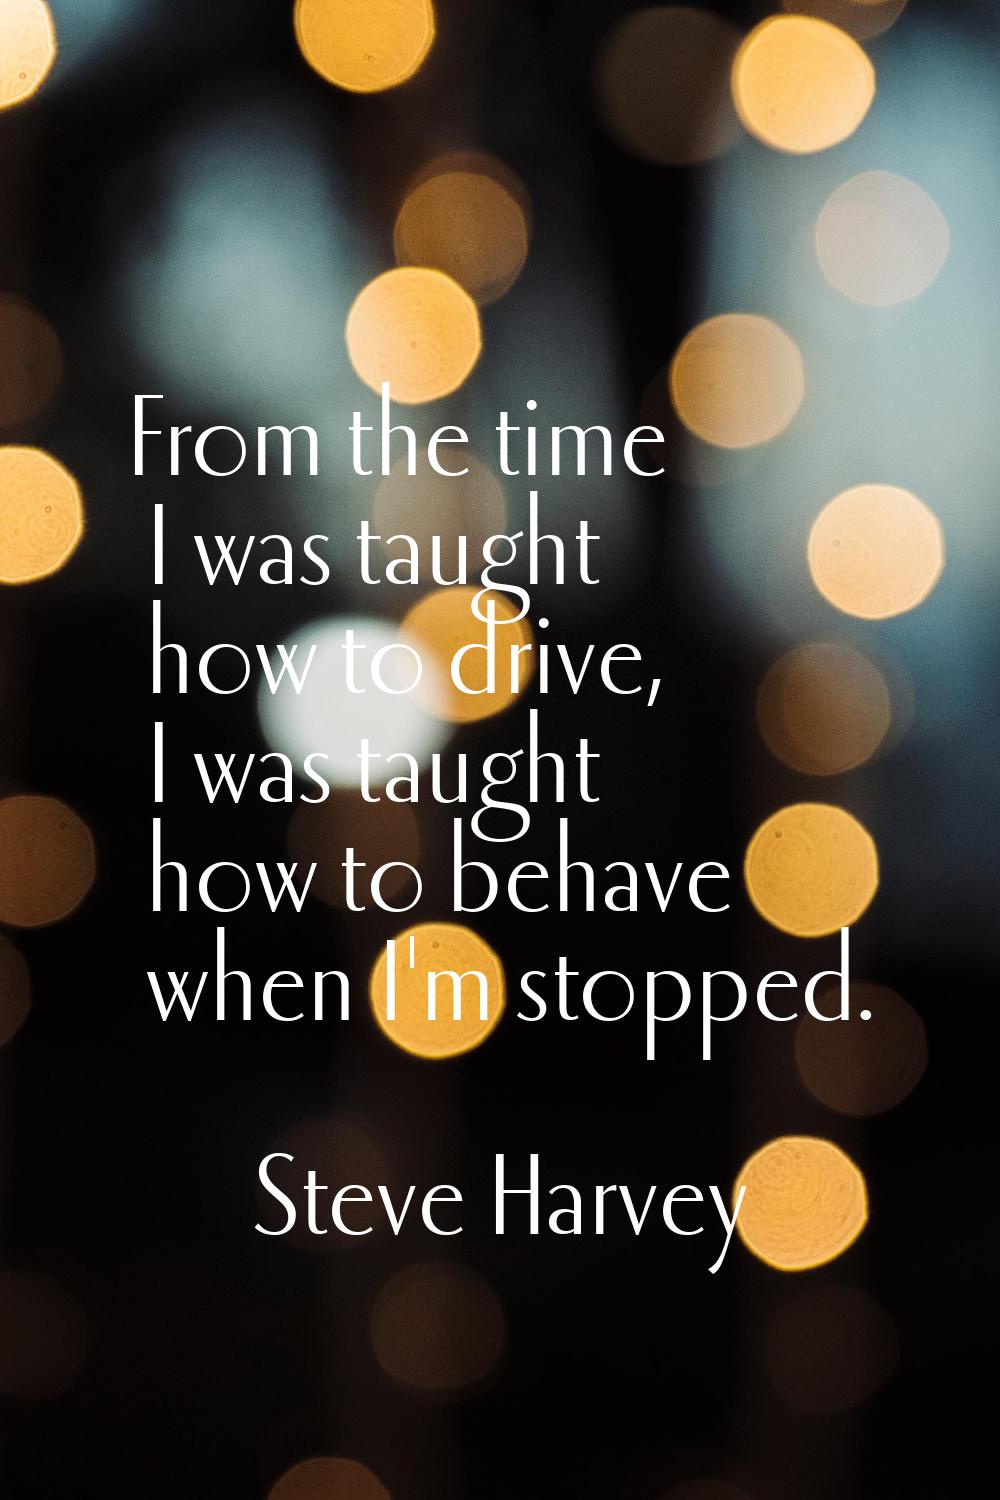 From the time I was taught how to drive, I was taught how to behave when I'm stopped.